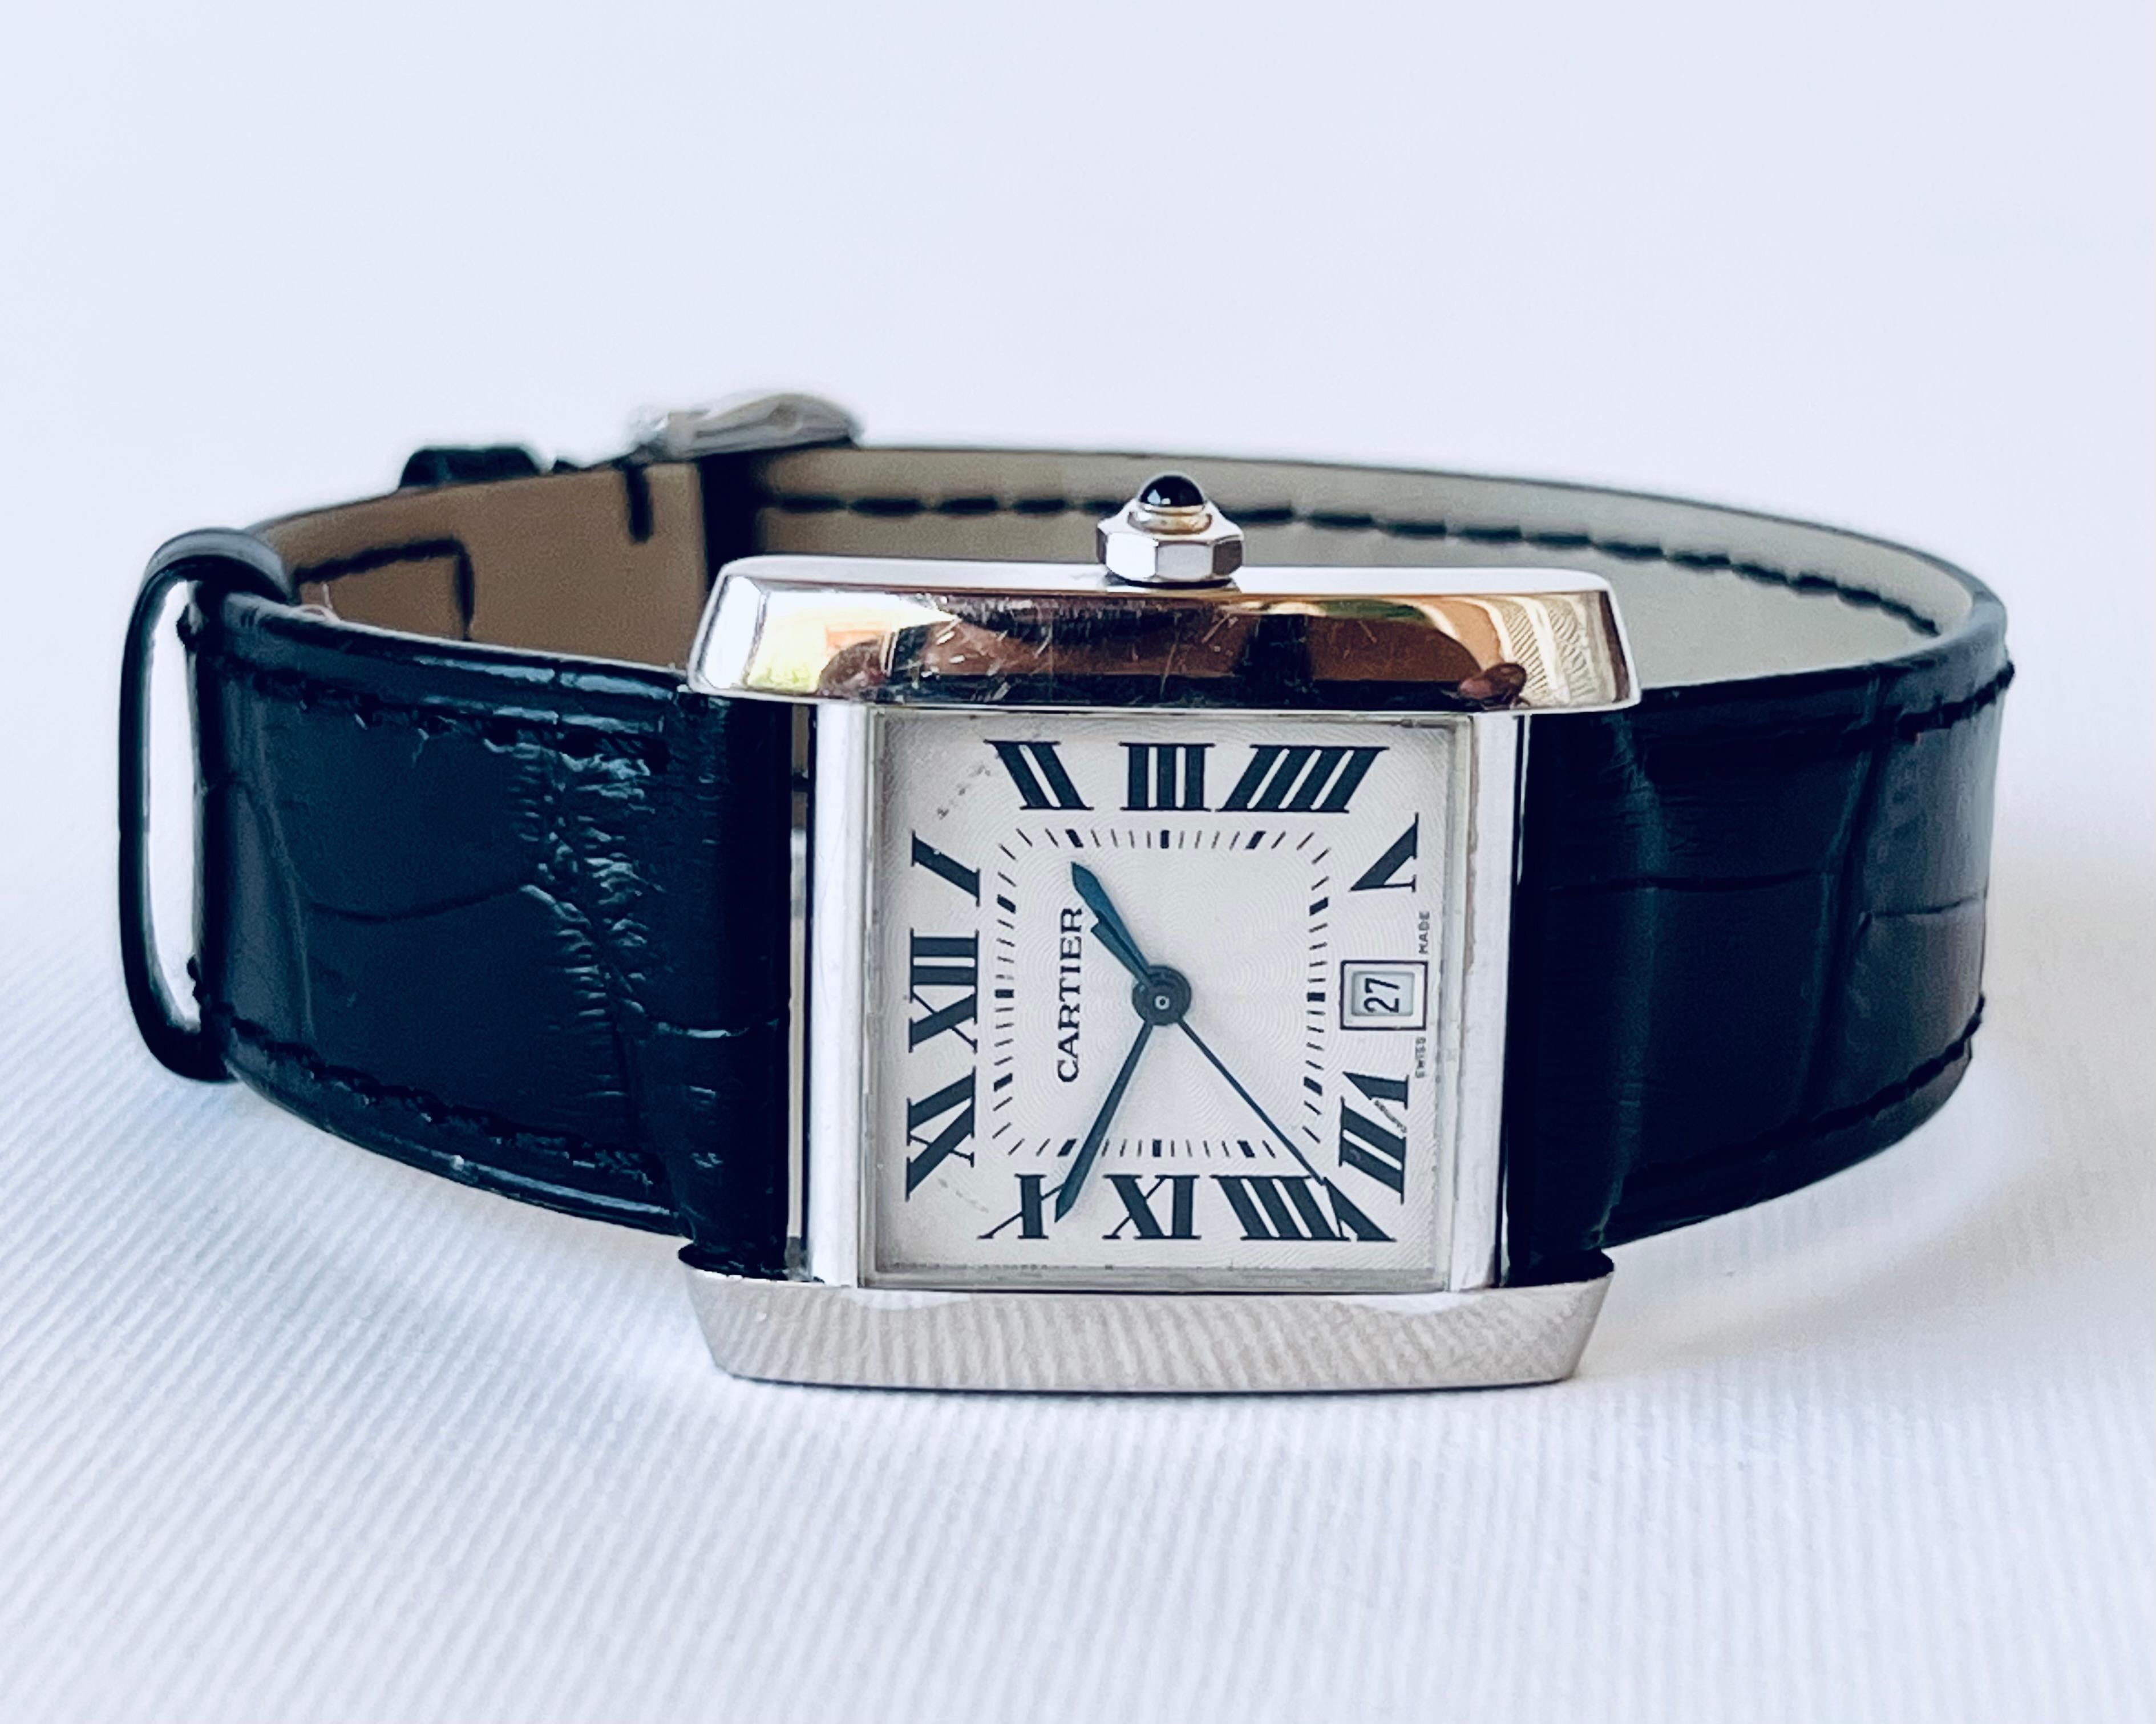 Cartier Tank Française 18K White Gold 2366 Automatic Date Watch Boxed

Brand: Cartier  
 
Model : Cartier Tank Française  
 
Reference Number :  2366  

Watch Number:  892593 CD

Features : Crystal Sapphire -  Roman numerals Dial - Water